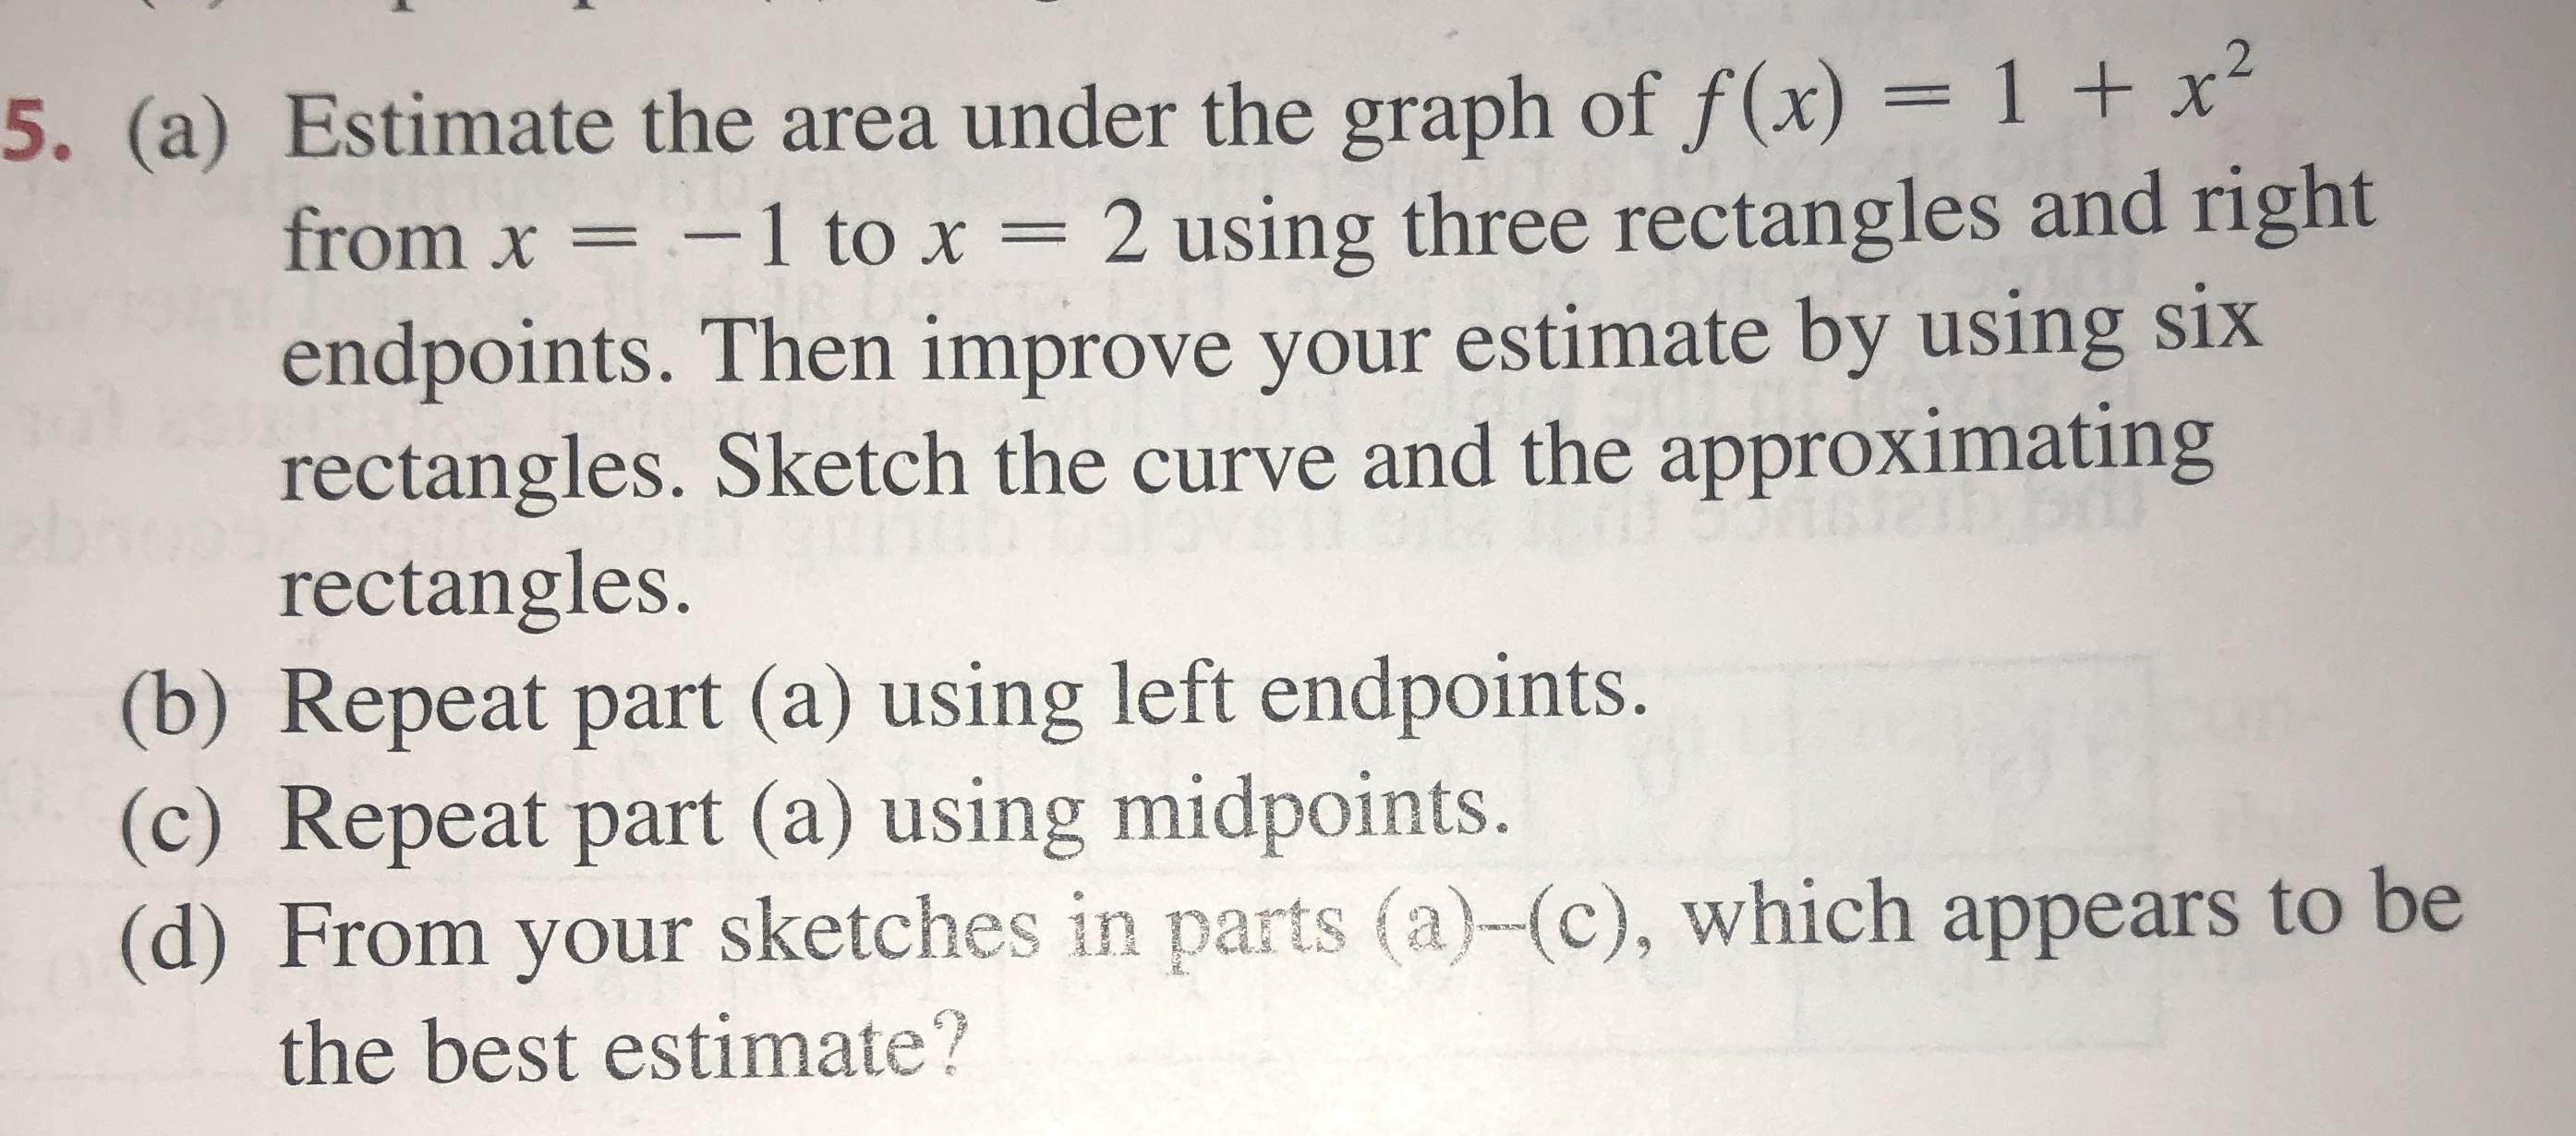 5. (a) Estimate the area under the graph of f(x)= 1 + x
from x =-1 to x 2 using three rectangles and right
endpoints. Then improve your estimate by using six
rectangles. Sketch the curve and the approximating
rectangles.
(b) Repeat part (a) using left endpoints.
(c) Repeat part (a) using midpoints.
(d) From your sketches in parts (a)-(c), which appears to be
2
the best estimate?
